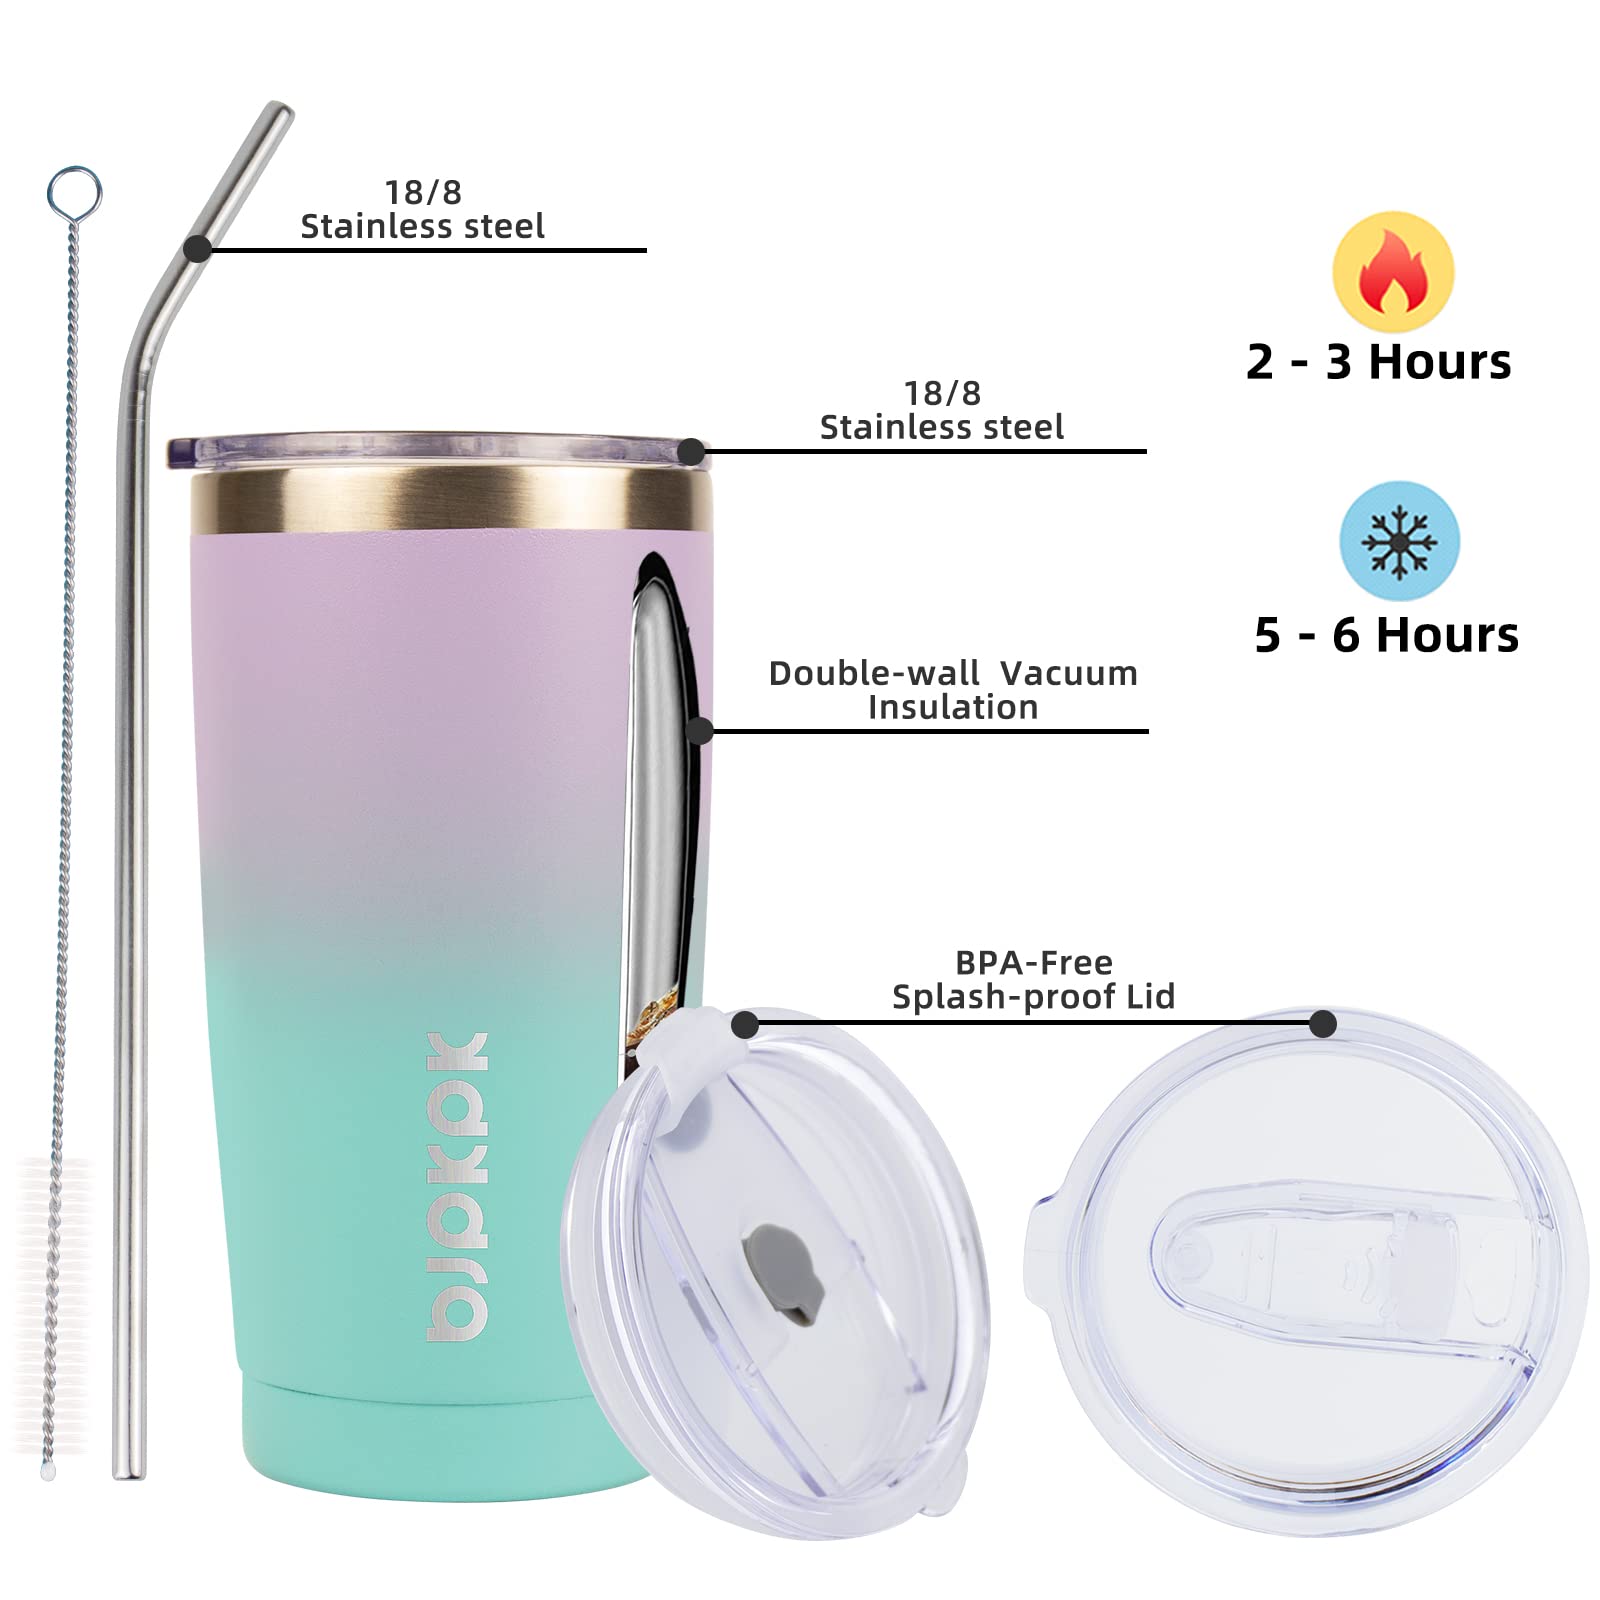 BJPKPK Insulated Stainless Steel Tumbler, Coffee Tumbler with Lid and Straw, Double Wall Vacuum Travel Mug, Powder Coated Leak-Proof Tumbler Cup,Oasis